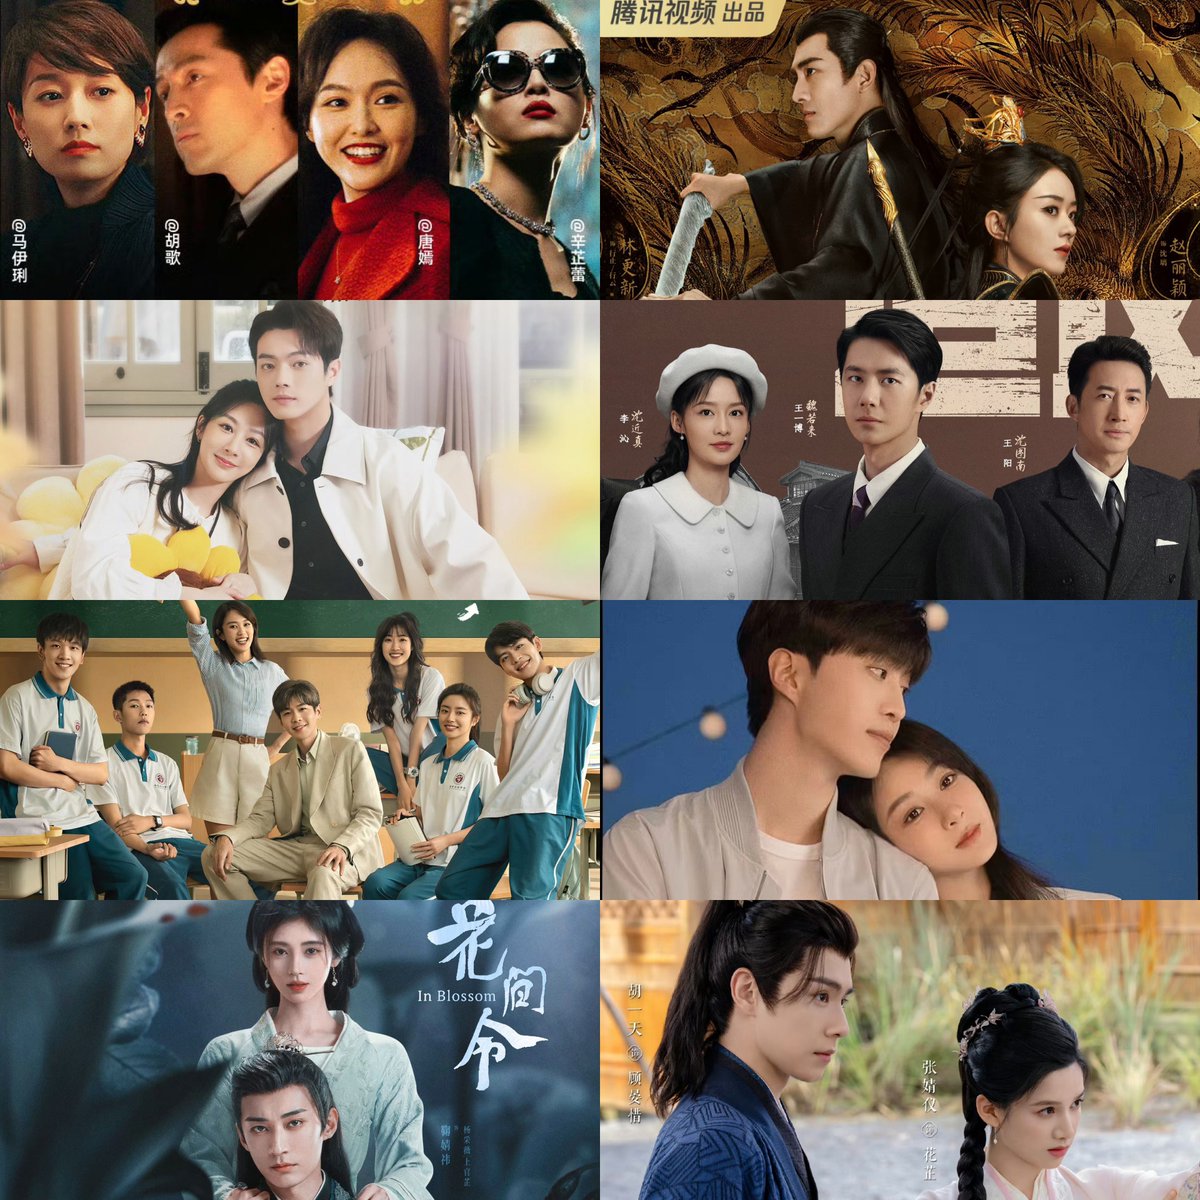 In 2024 (so far)
• 3 dramas exceeded 30000 heat index on Tencent
#BlossomsShanghai
#TheLegendOfShenli
#BestChoiceEver
• 1 drama exceeded 10000 heat index on iQIYI
#WarOfFaith 
• 4 dramas broke 10000 heat index on Youku
#TheHope
#LoveEndures
#InBlossom
#BlossomsInAdversity